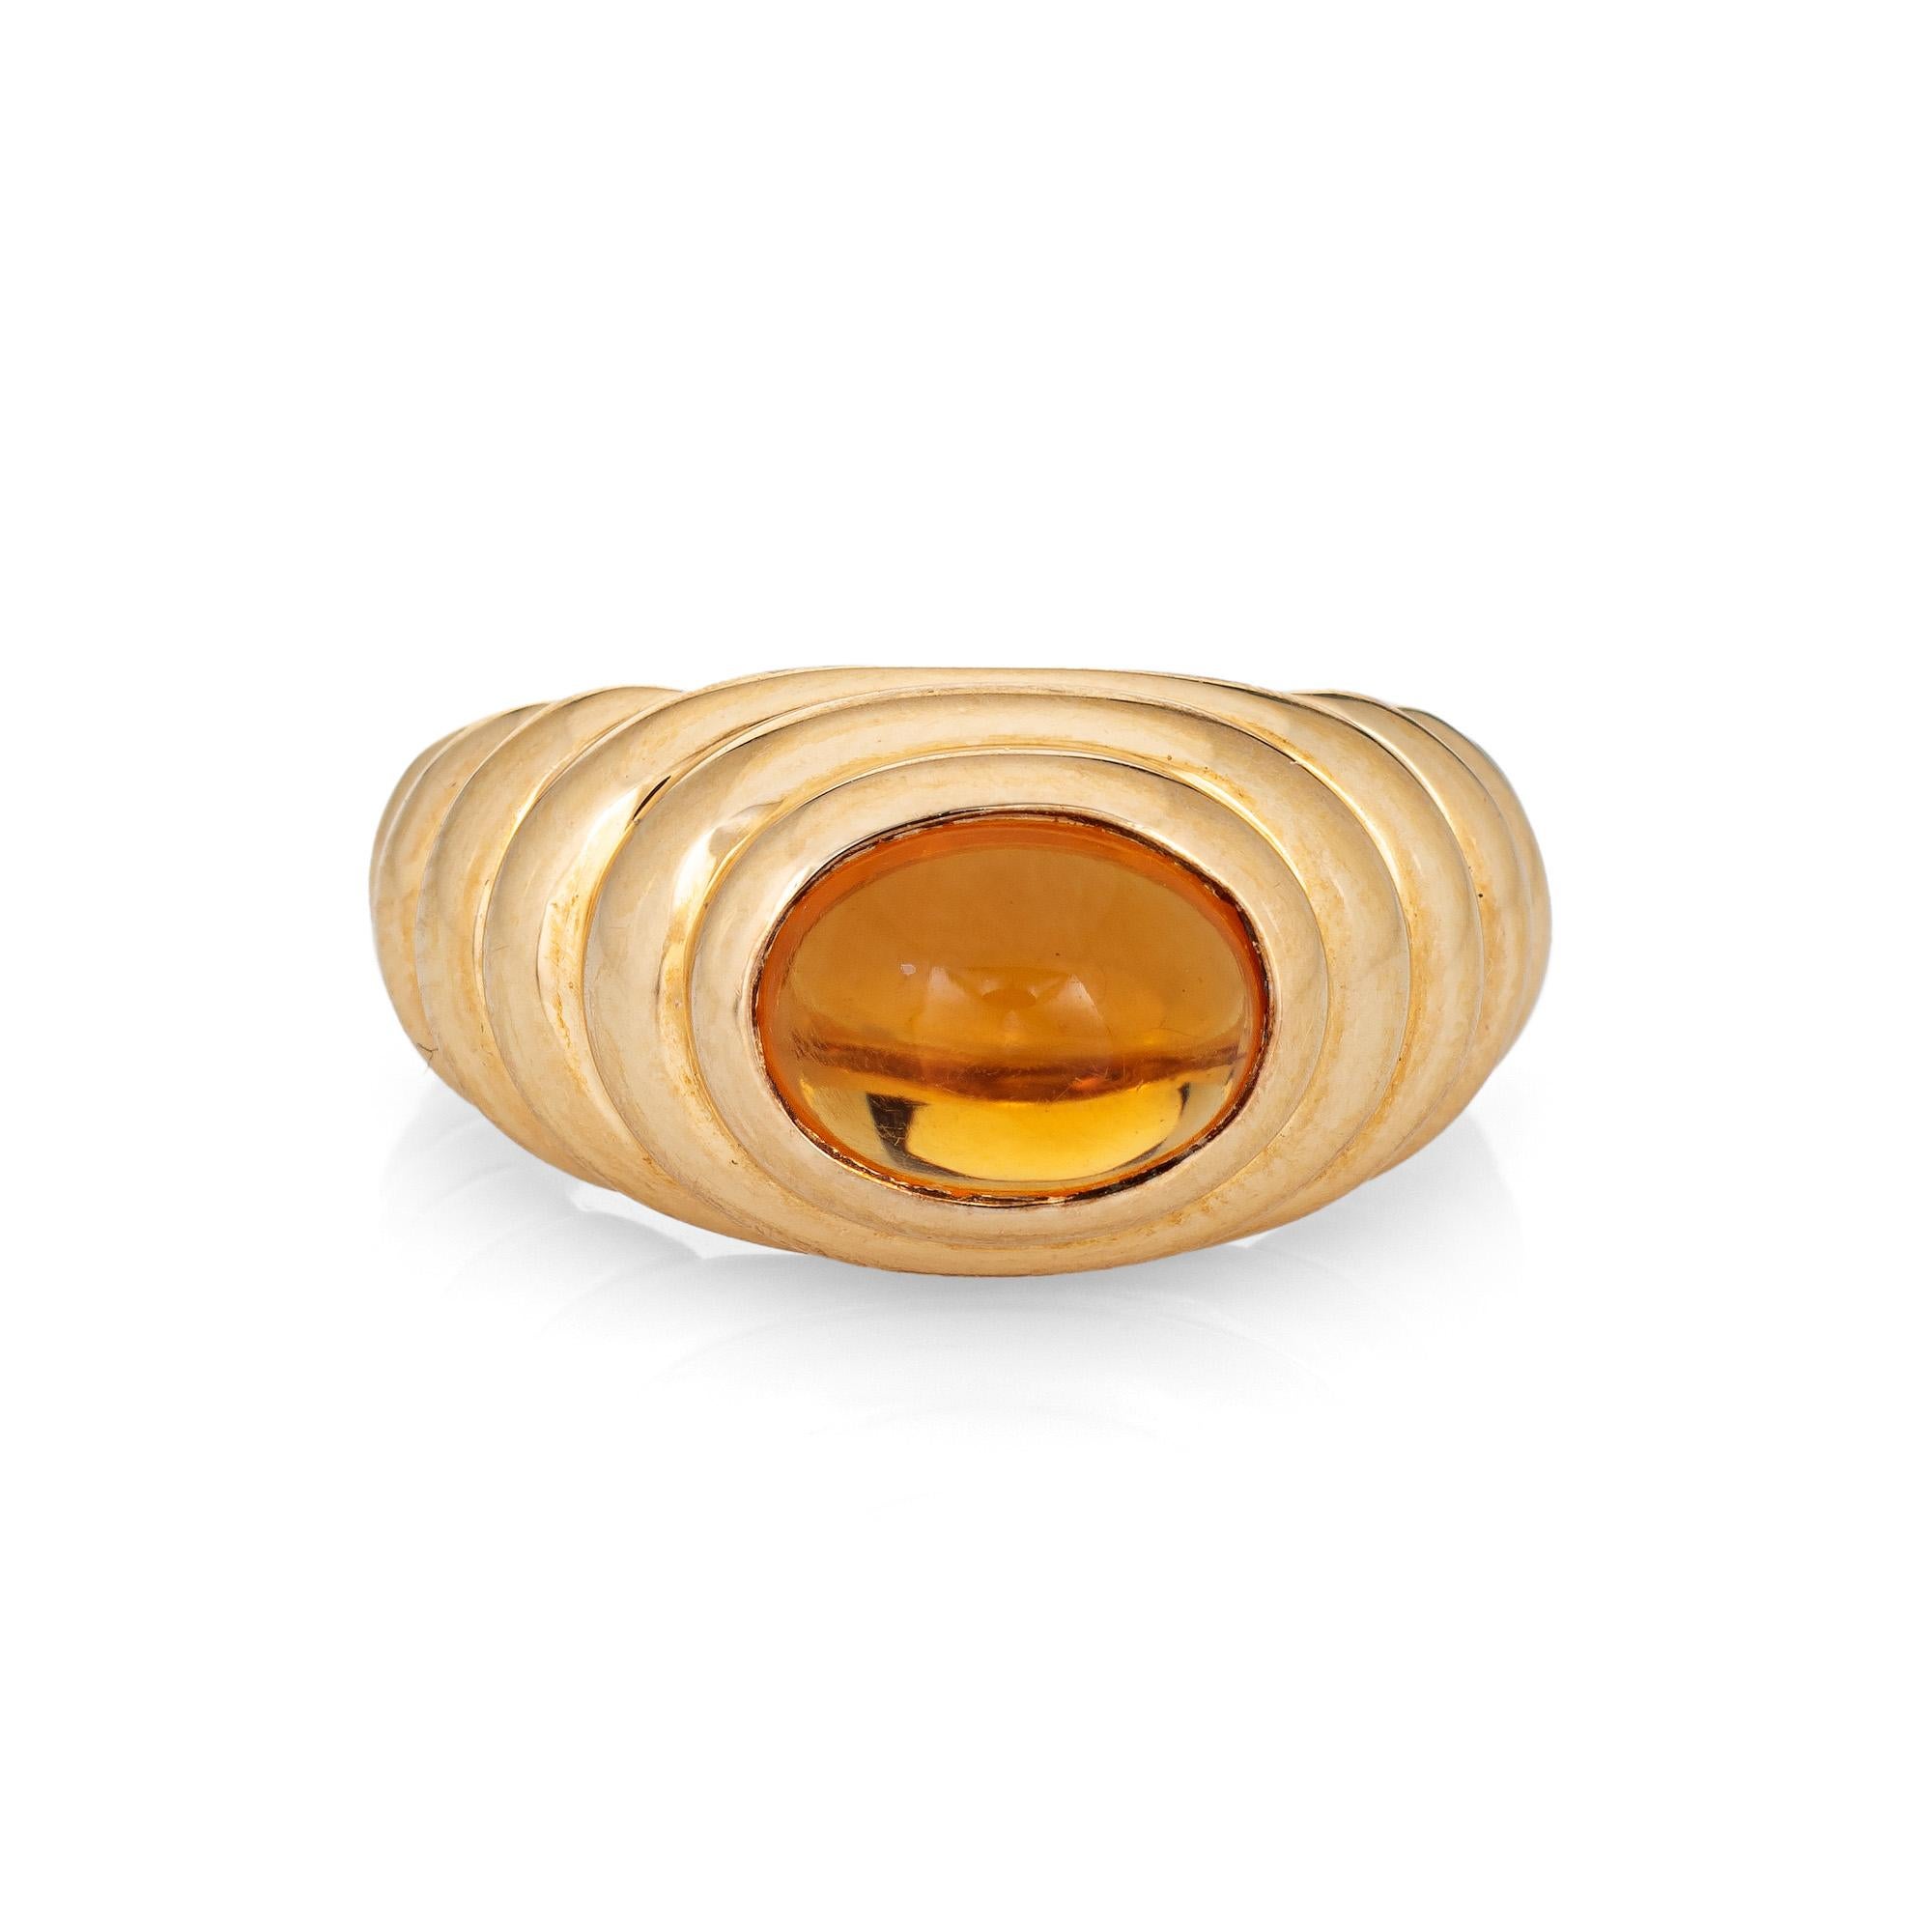 Pre-owned Bulgari citrine 'Doppio' ring crafted in 18k yellow gold (circa 1980s).

Cabochon cut citrine measures 9mm x 6.5mm (estimated at 2 carats). The citrine is in very good condition and free of cracks or chips.

The beautifully designed ring